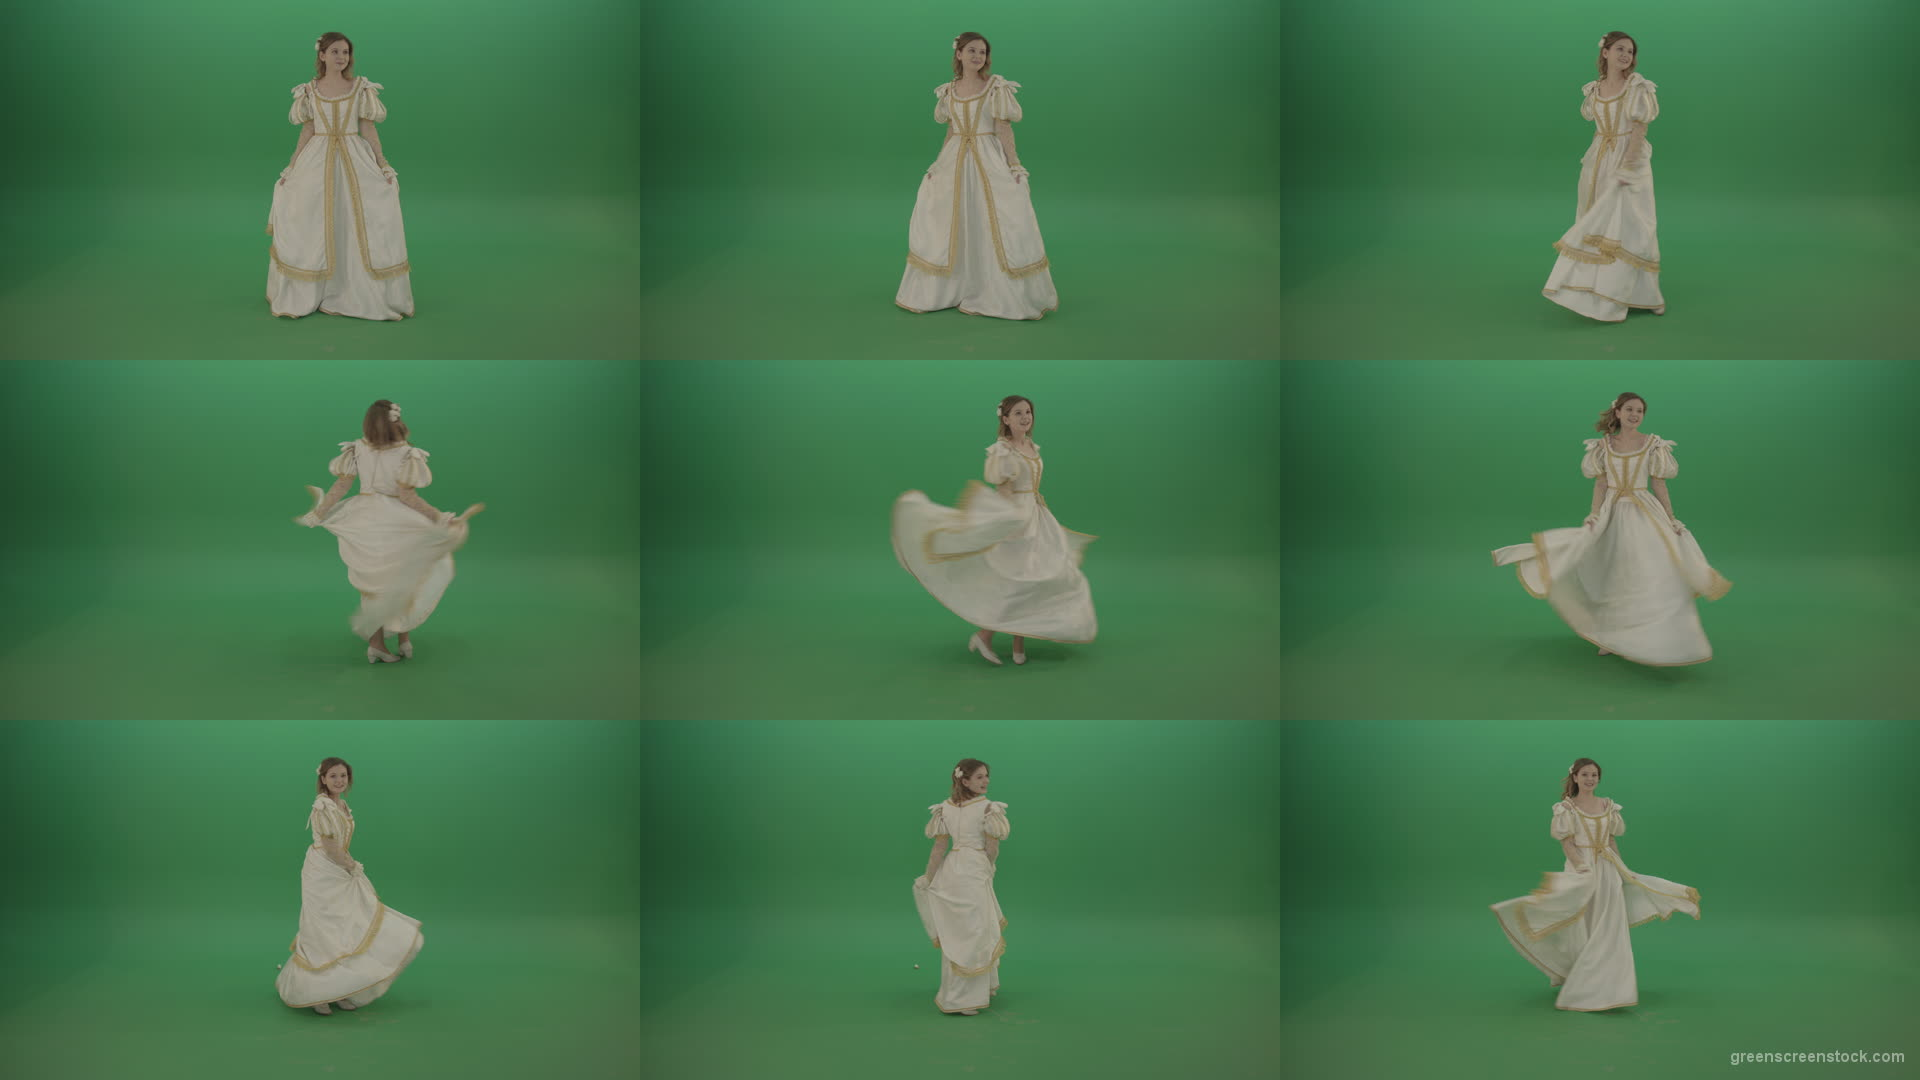 Merry-medieval-girl-dancing-and-rejoicing-isolated-on-green-background Green Screen Stock